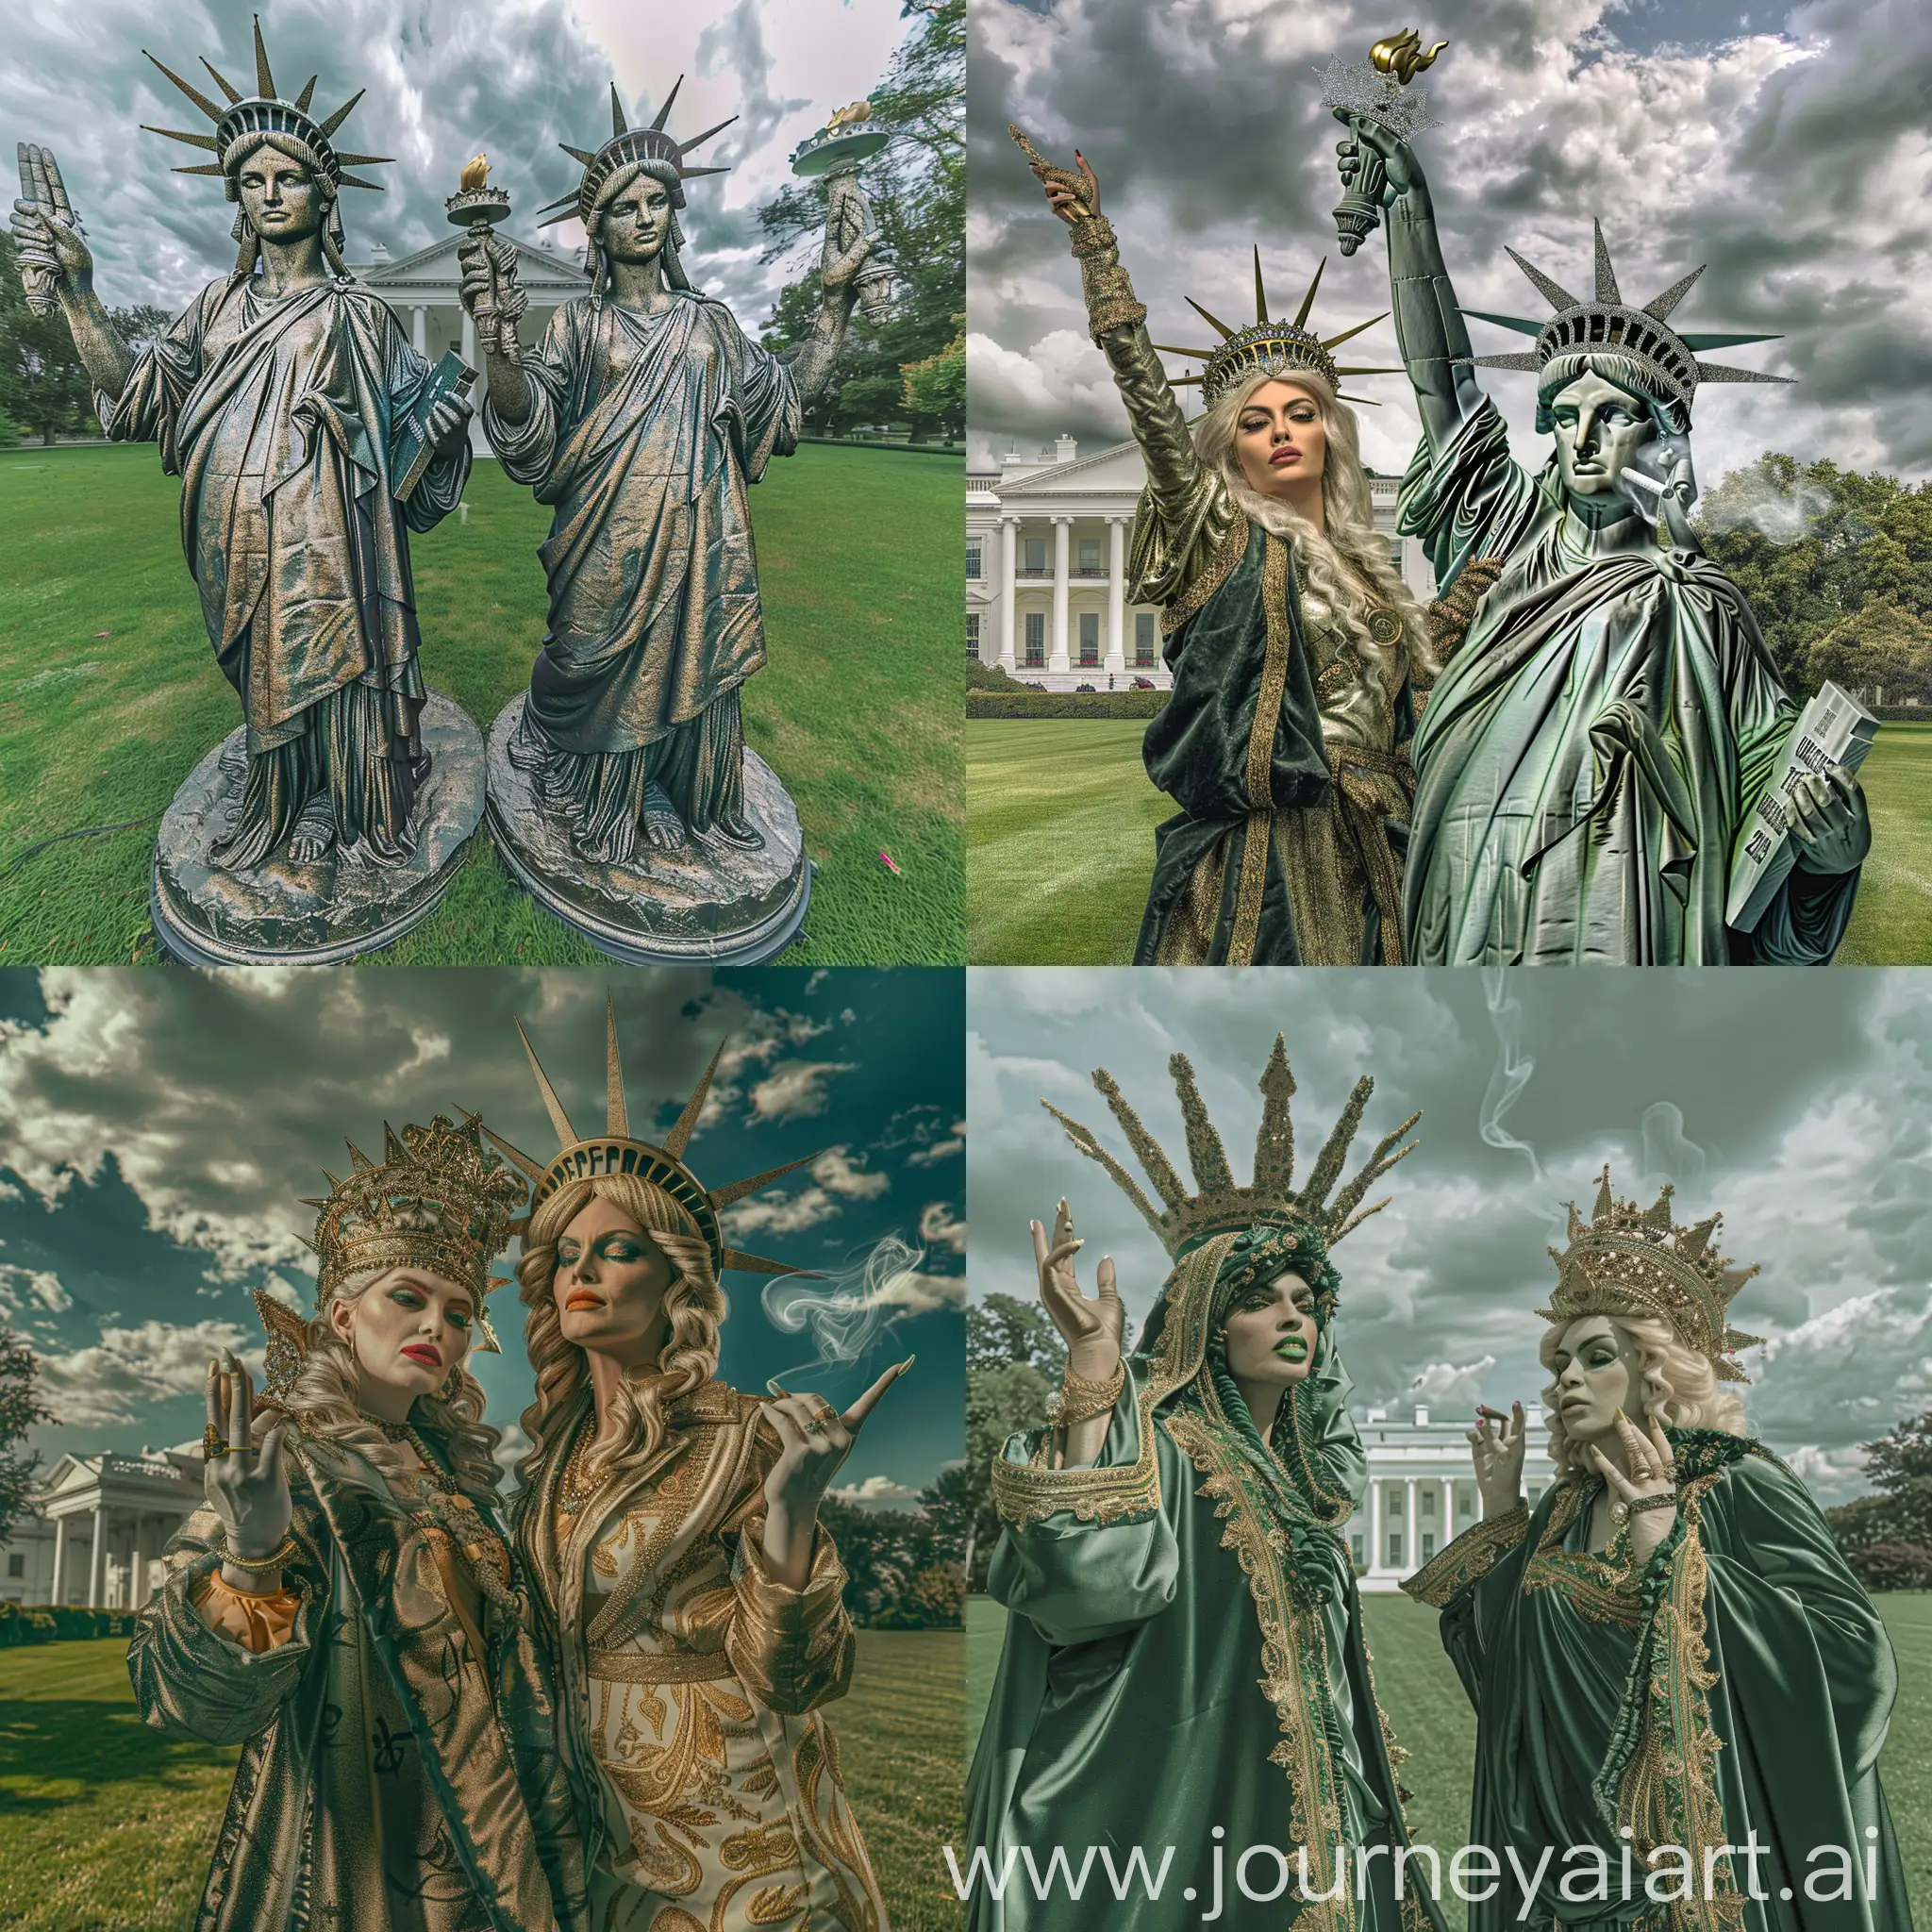 Madonna-Ciccone-Lookalikes-in-Statue-of-Liberty-Garb-Spar-at-White-House-Lawn